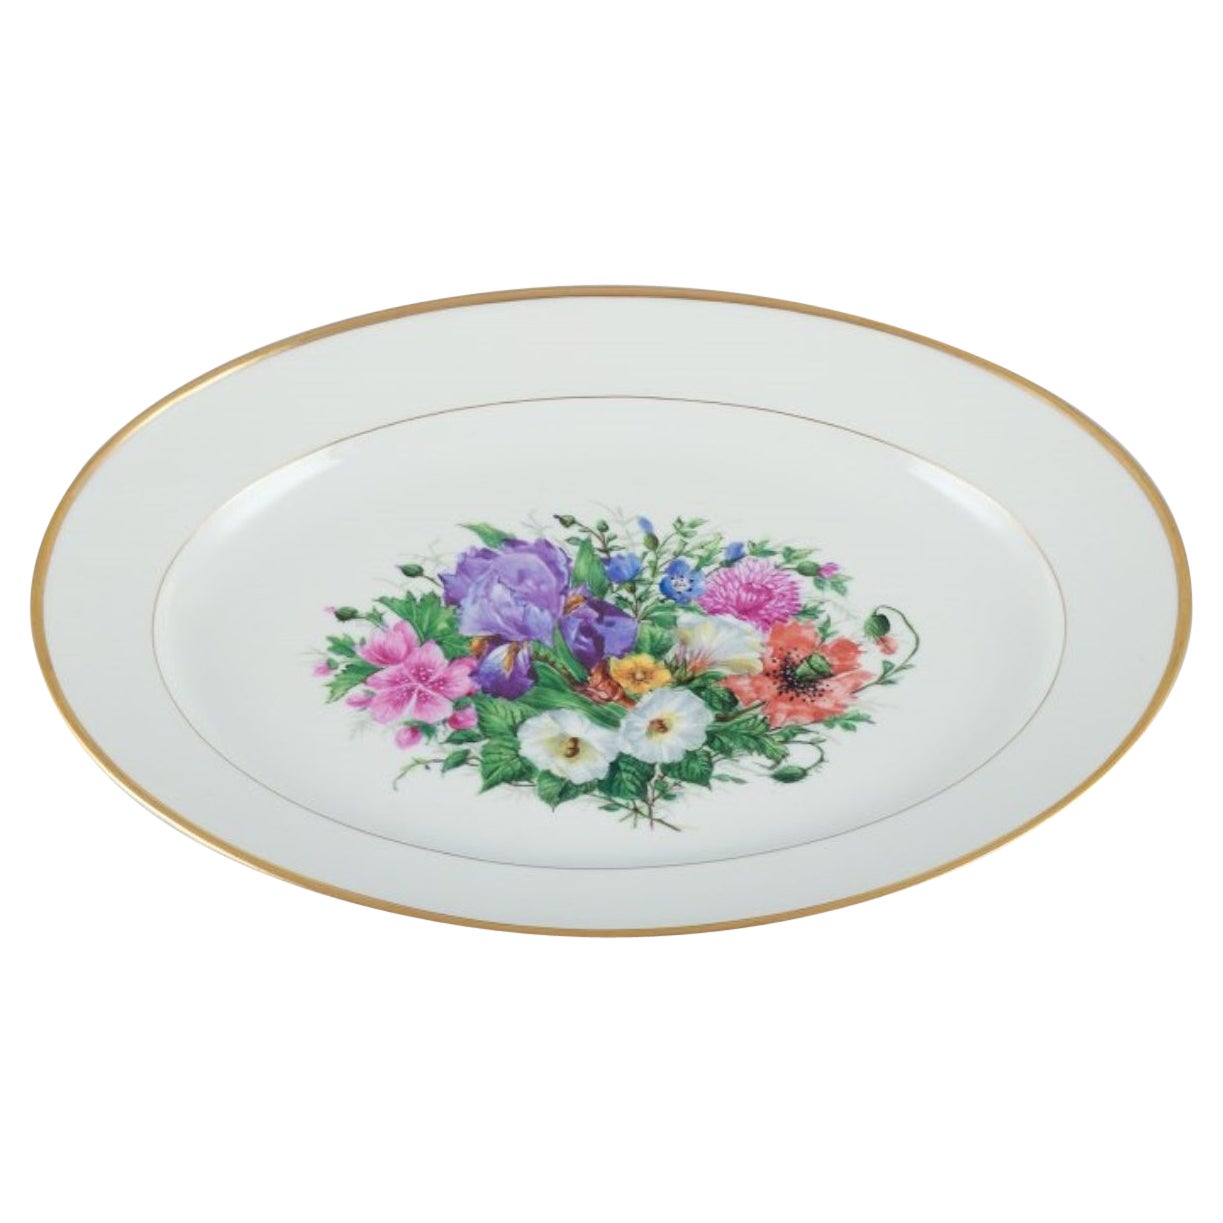 Bing & Grøndahl, large oval serving platter hand-painted with flowers For Sale